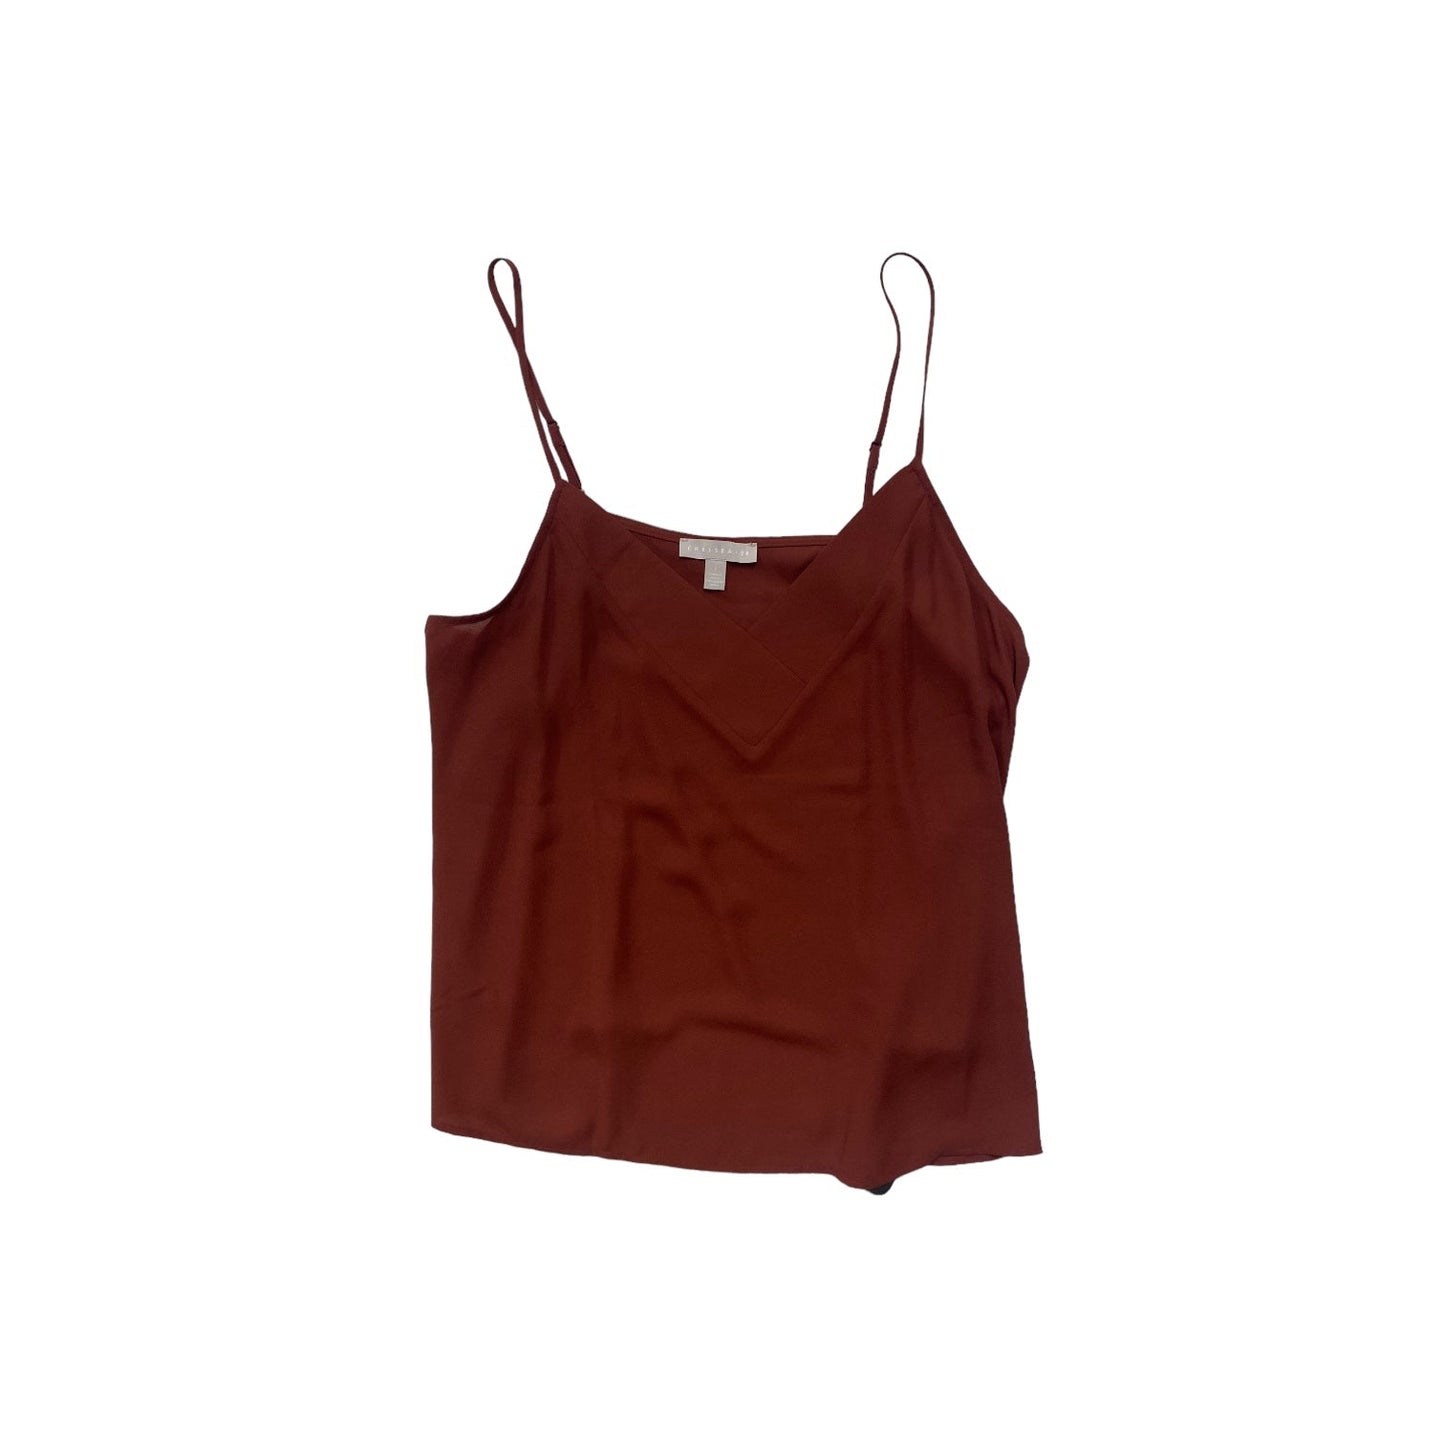 Copper Top Sleeveless Chelsea 28, Size L